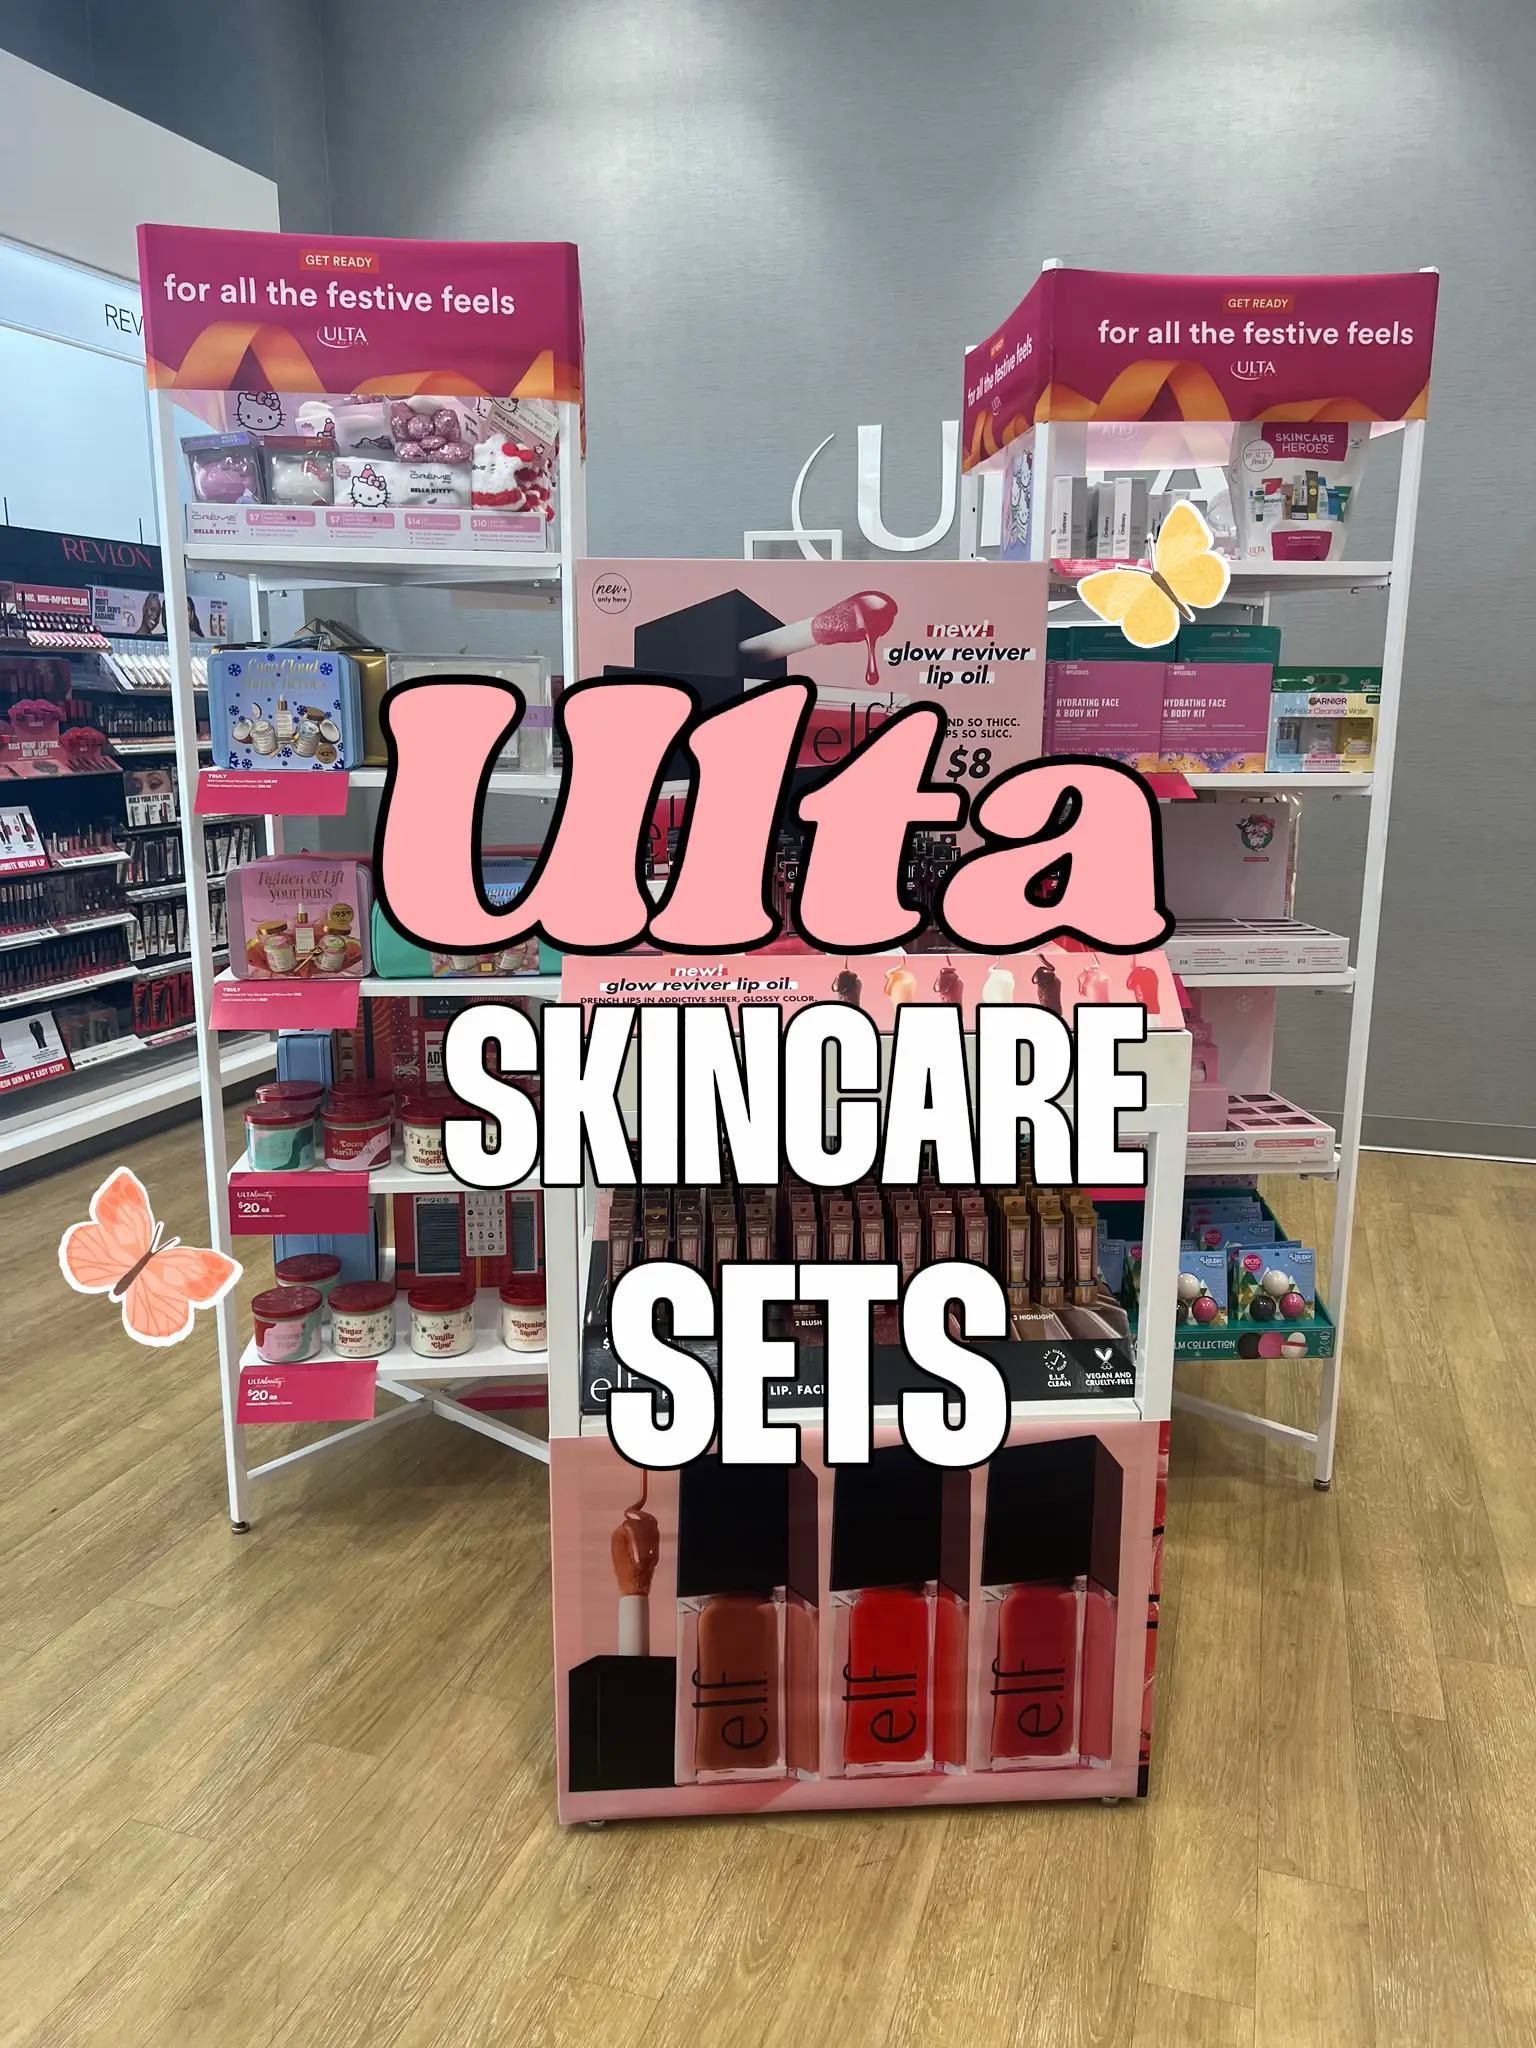 ULTA Summer Essentials Kit Is Here With 14 Must-Haves This Season! - Hello  Subscription